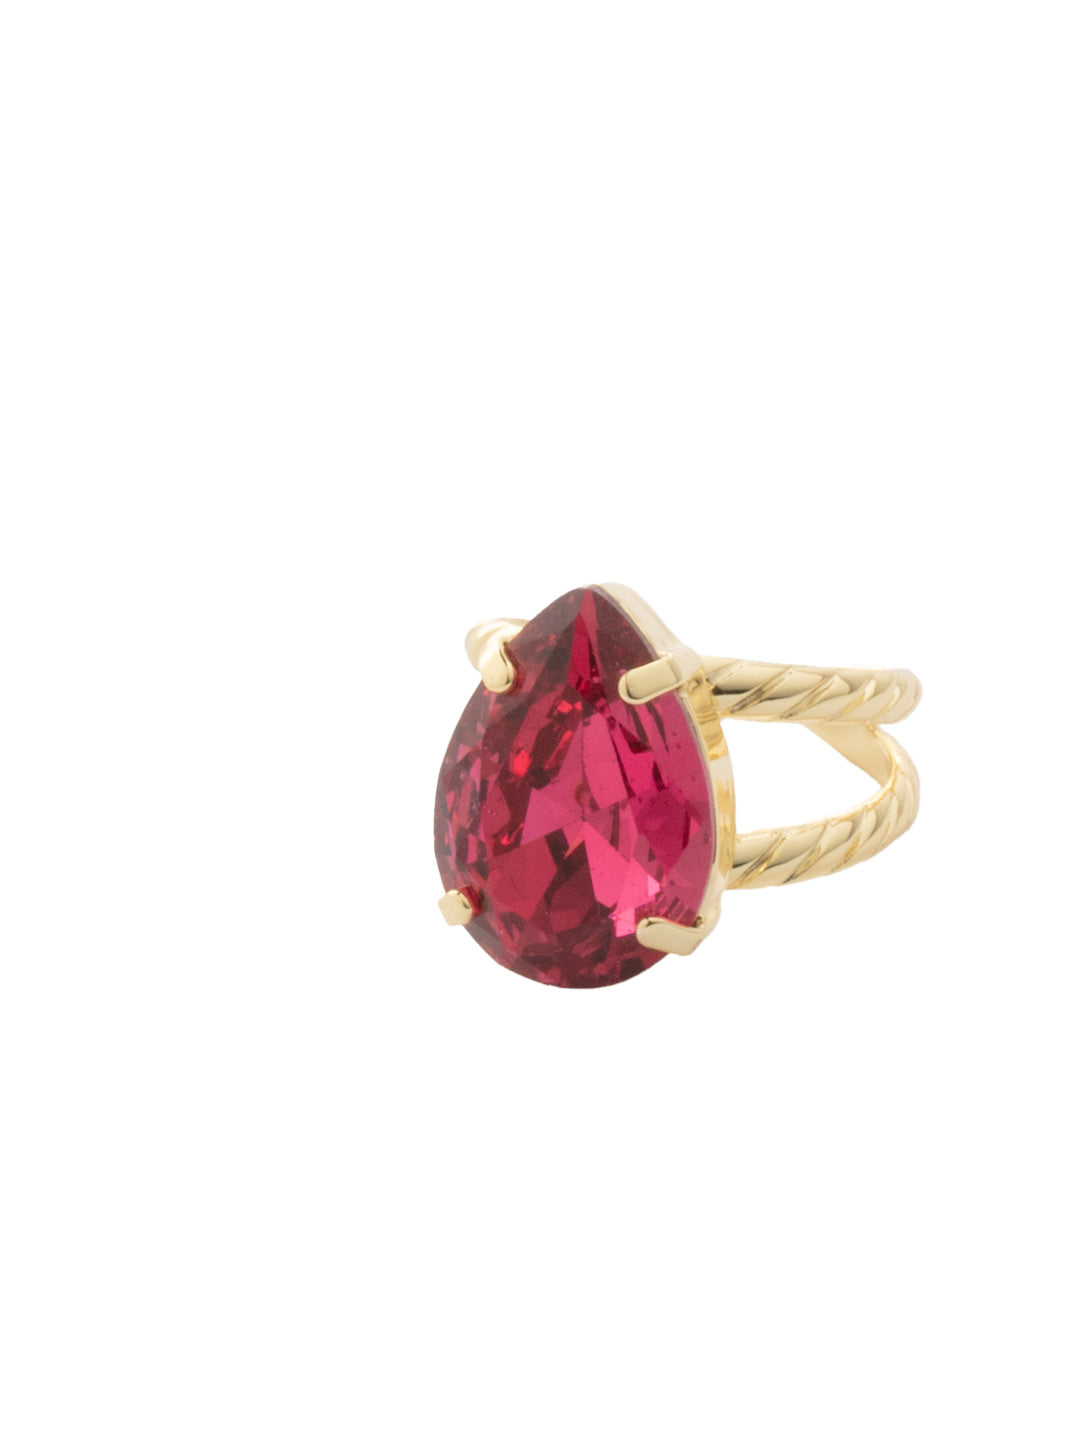 Eileen Statement Ring - RFF10BGRO - <p>The Eileen Statement Ring features a single pear cut candy gem crystal on an adjustable open ring band. From Sorrelli's Rose collection in our Bright Gold-tone finish.</p>